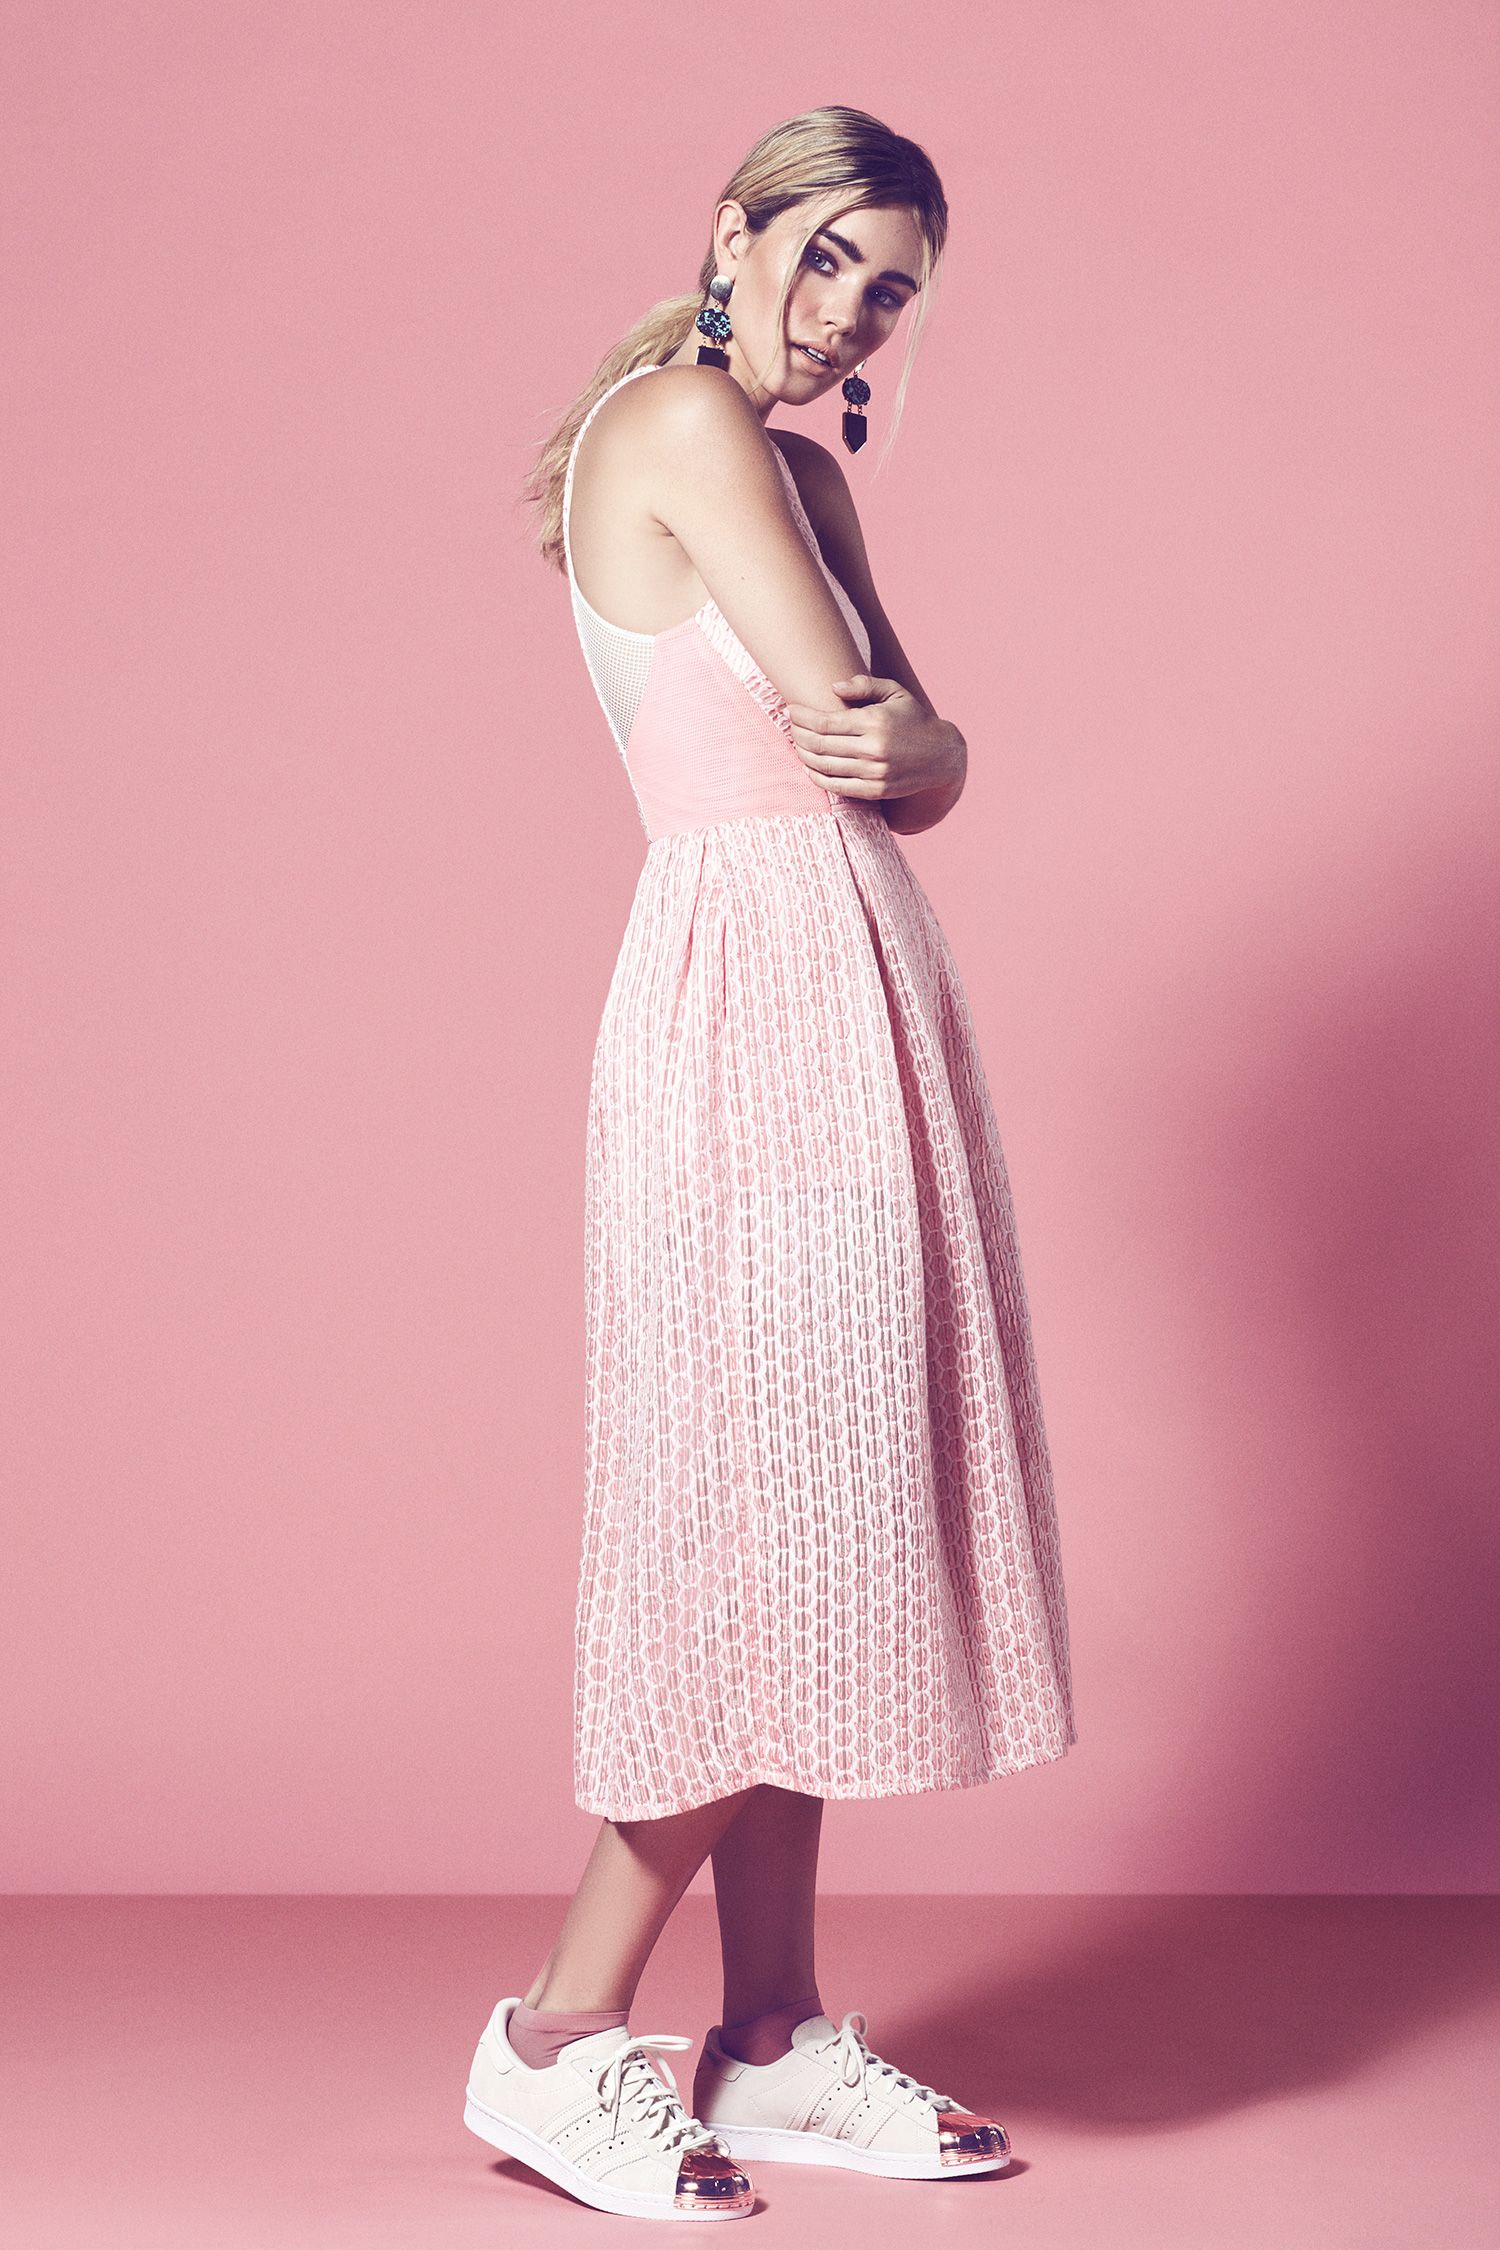 fashion-pink-story-pastels-editorial-pastel-london-photographer-ruth-rose-sophie-young-storm-solstice-magazine-10